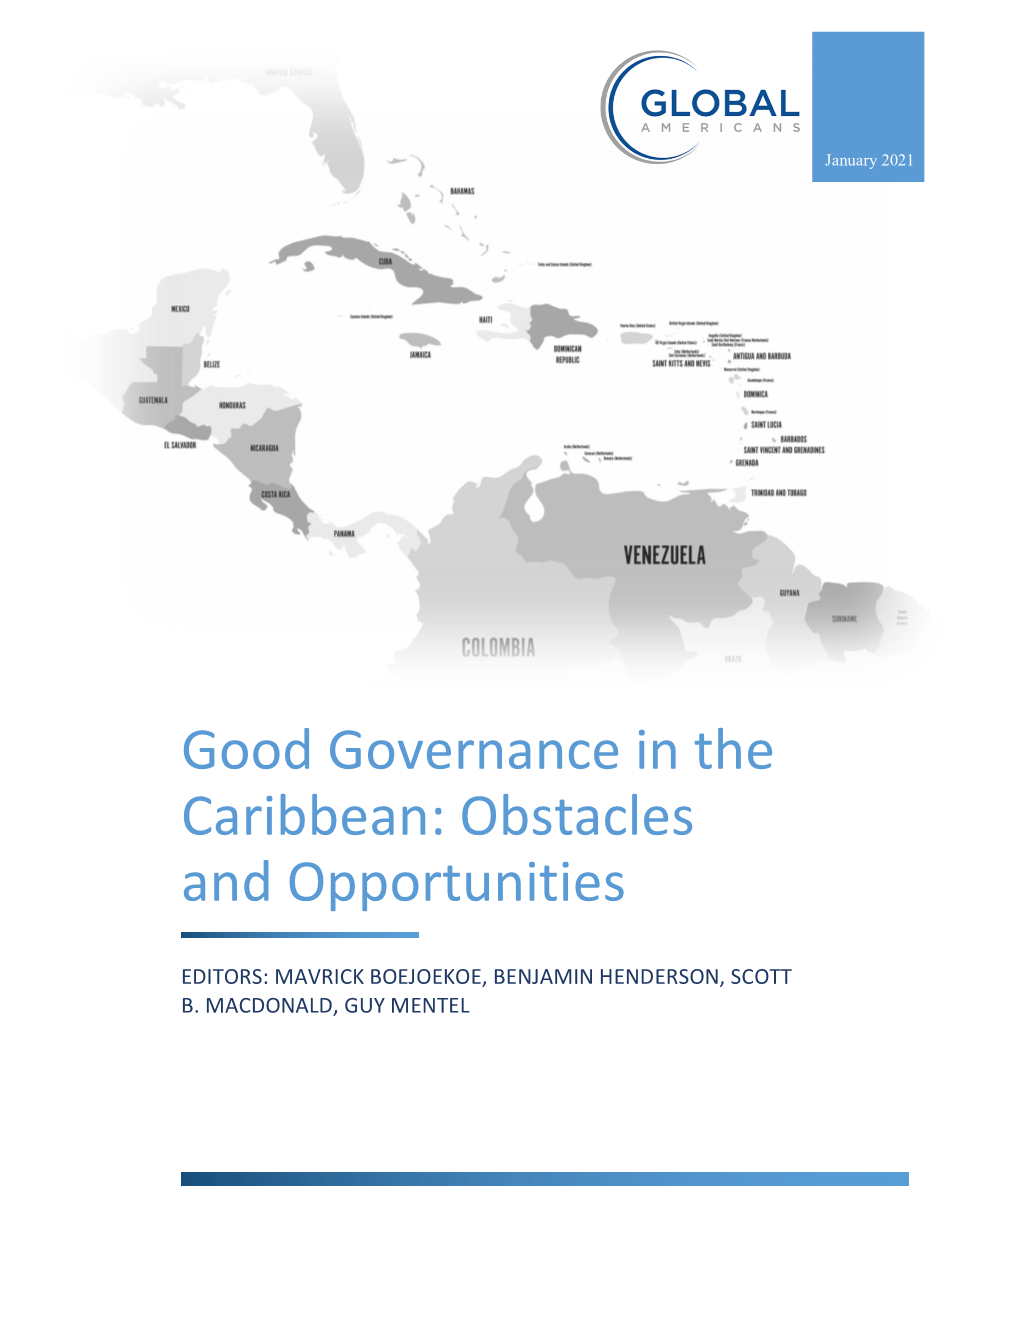 Good Governance in the Caribbean: Obstacles and Opportunities